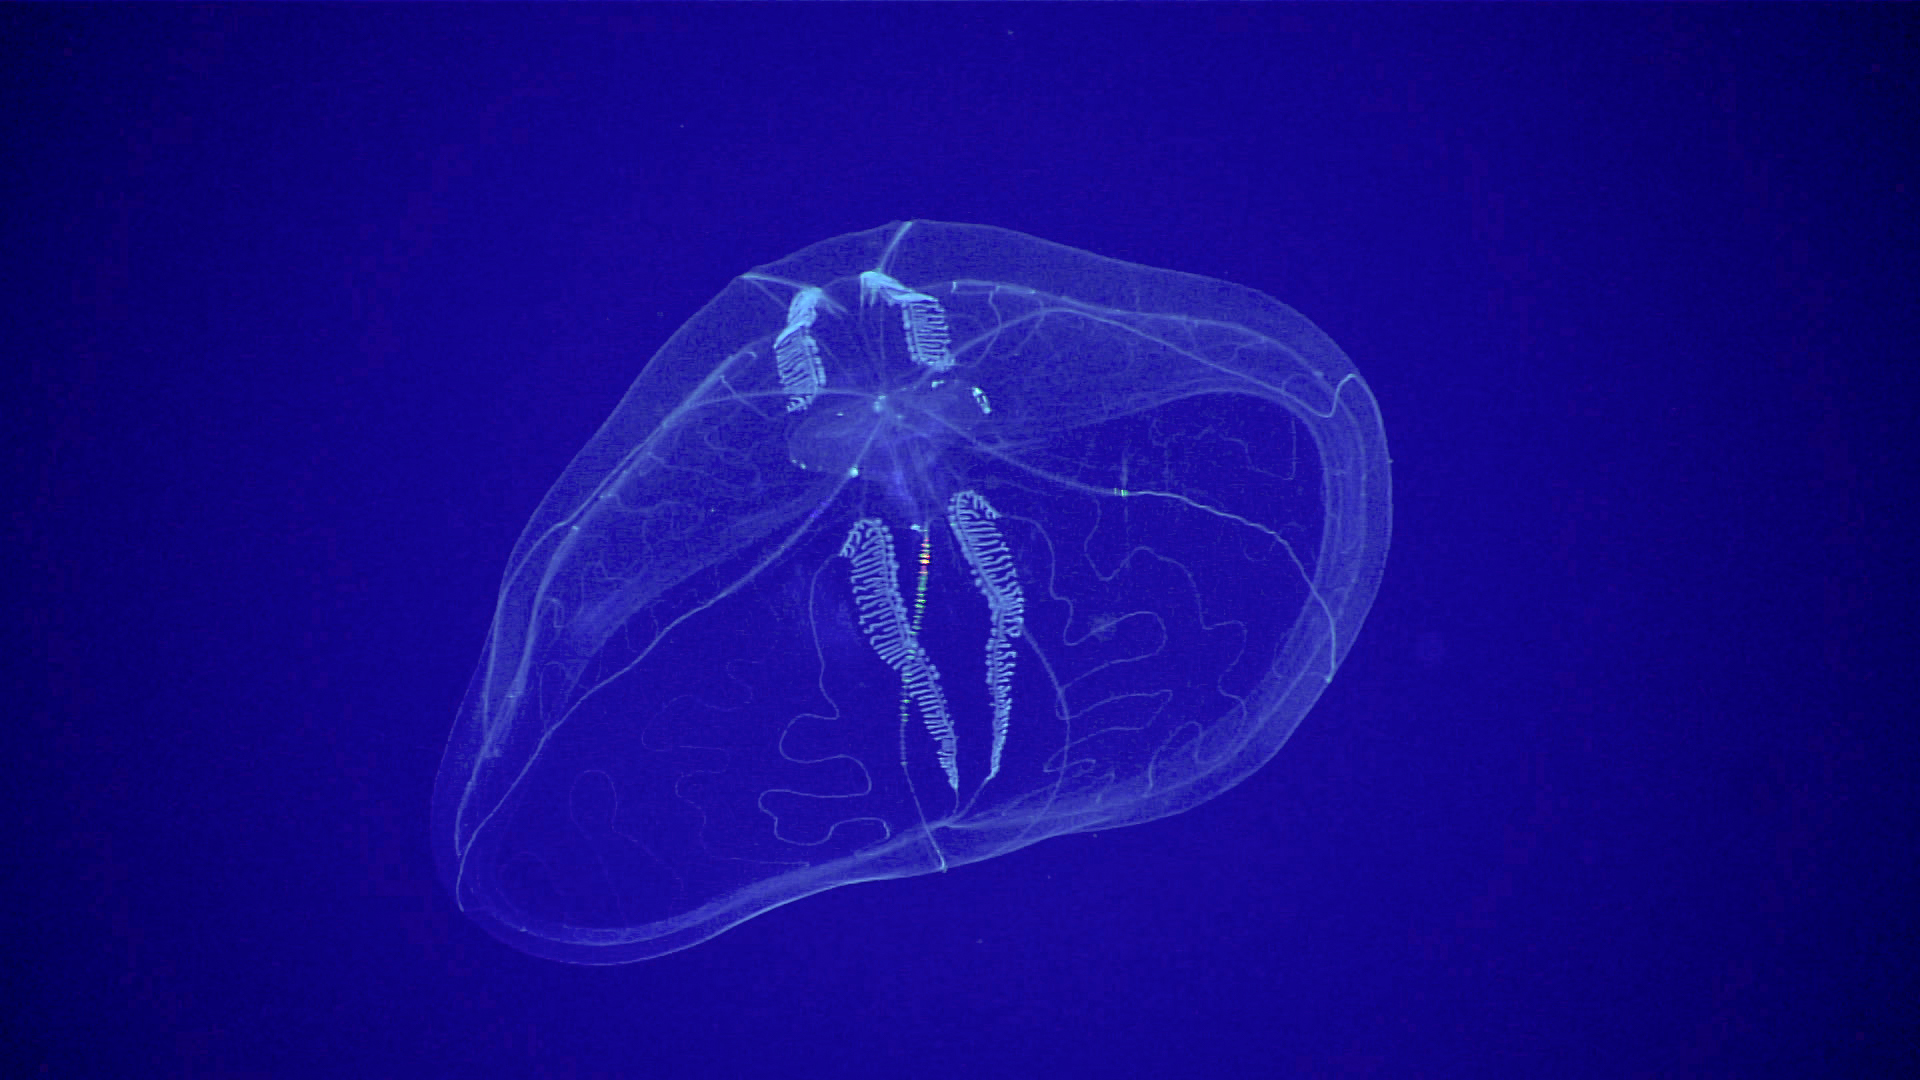 A translucent comb jelly at a depth of about 600 meters (600.46 m). (Image: NOAA)